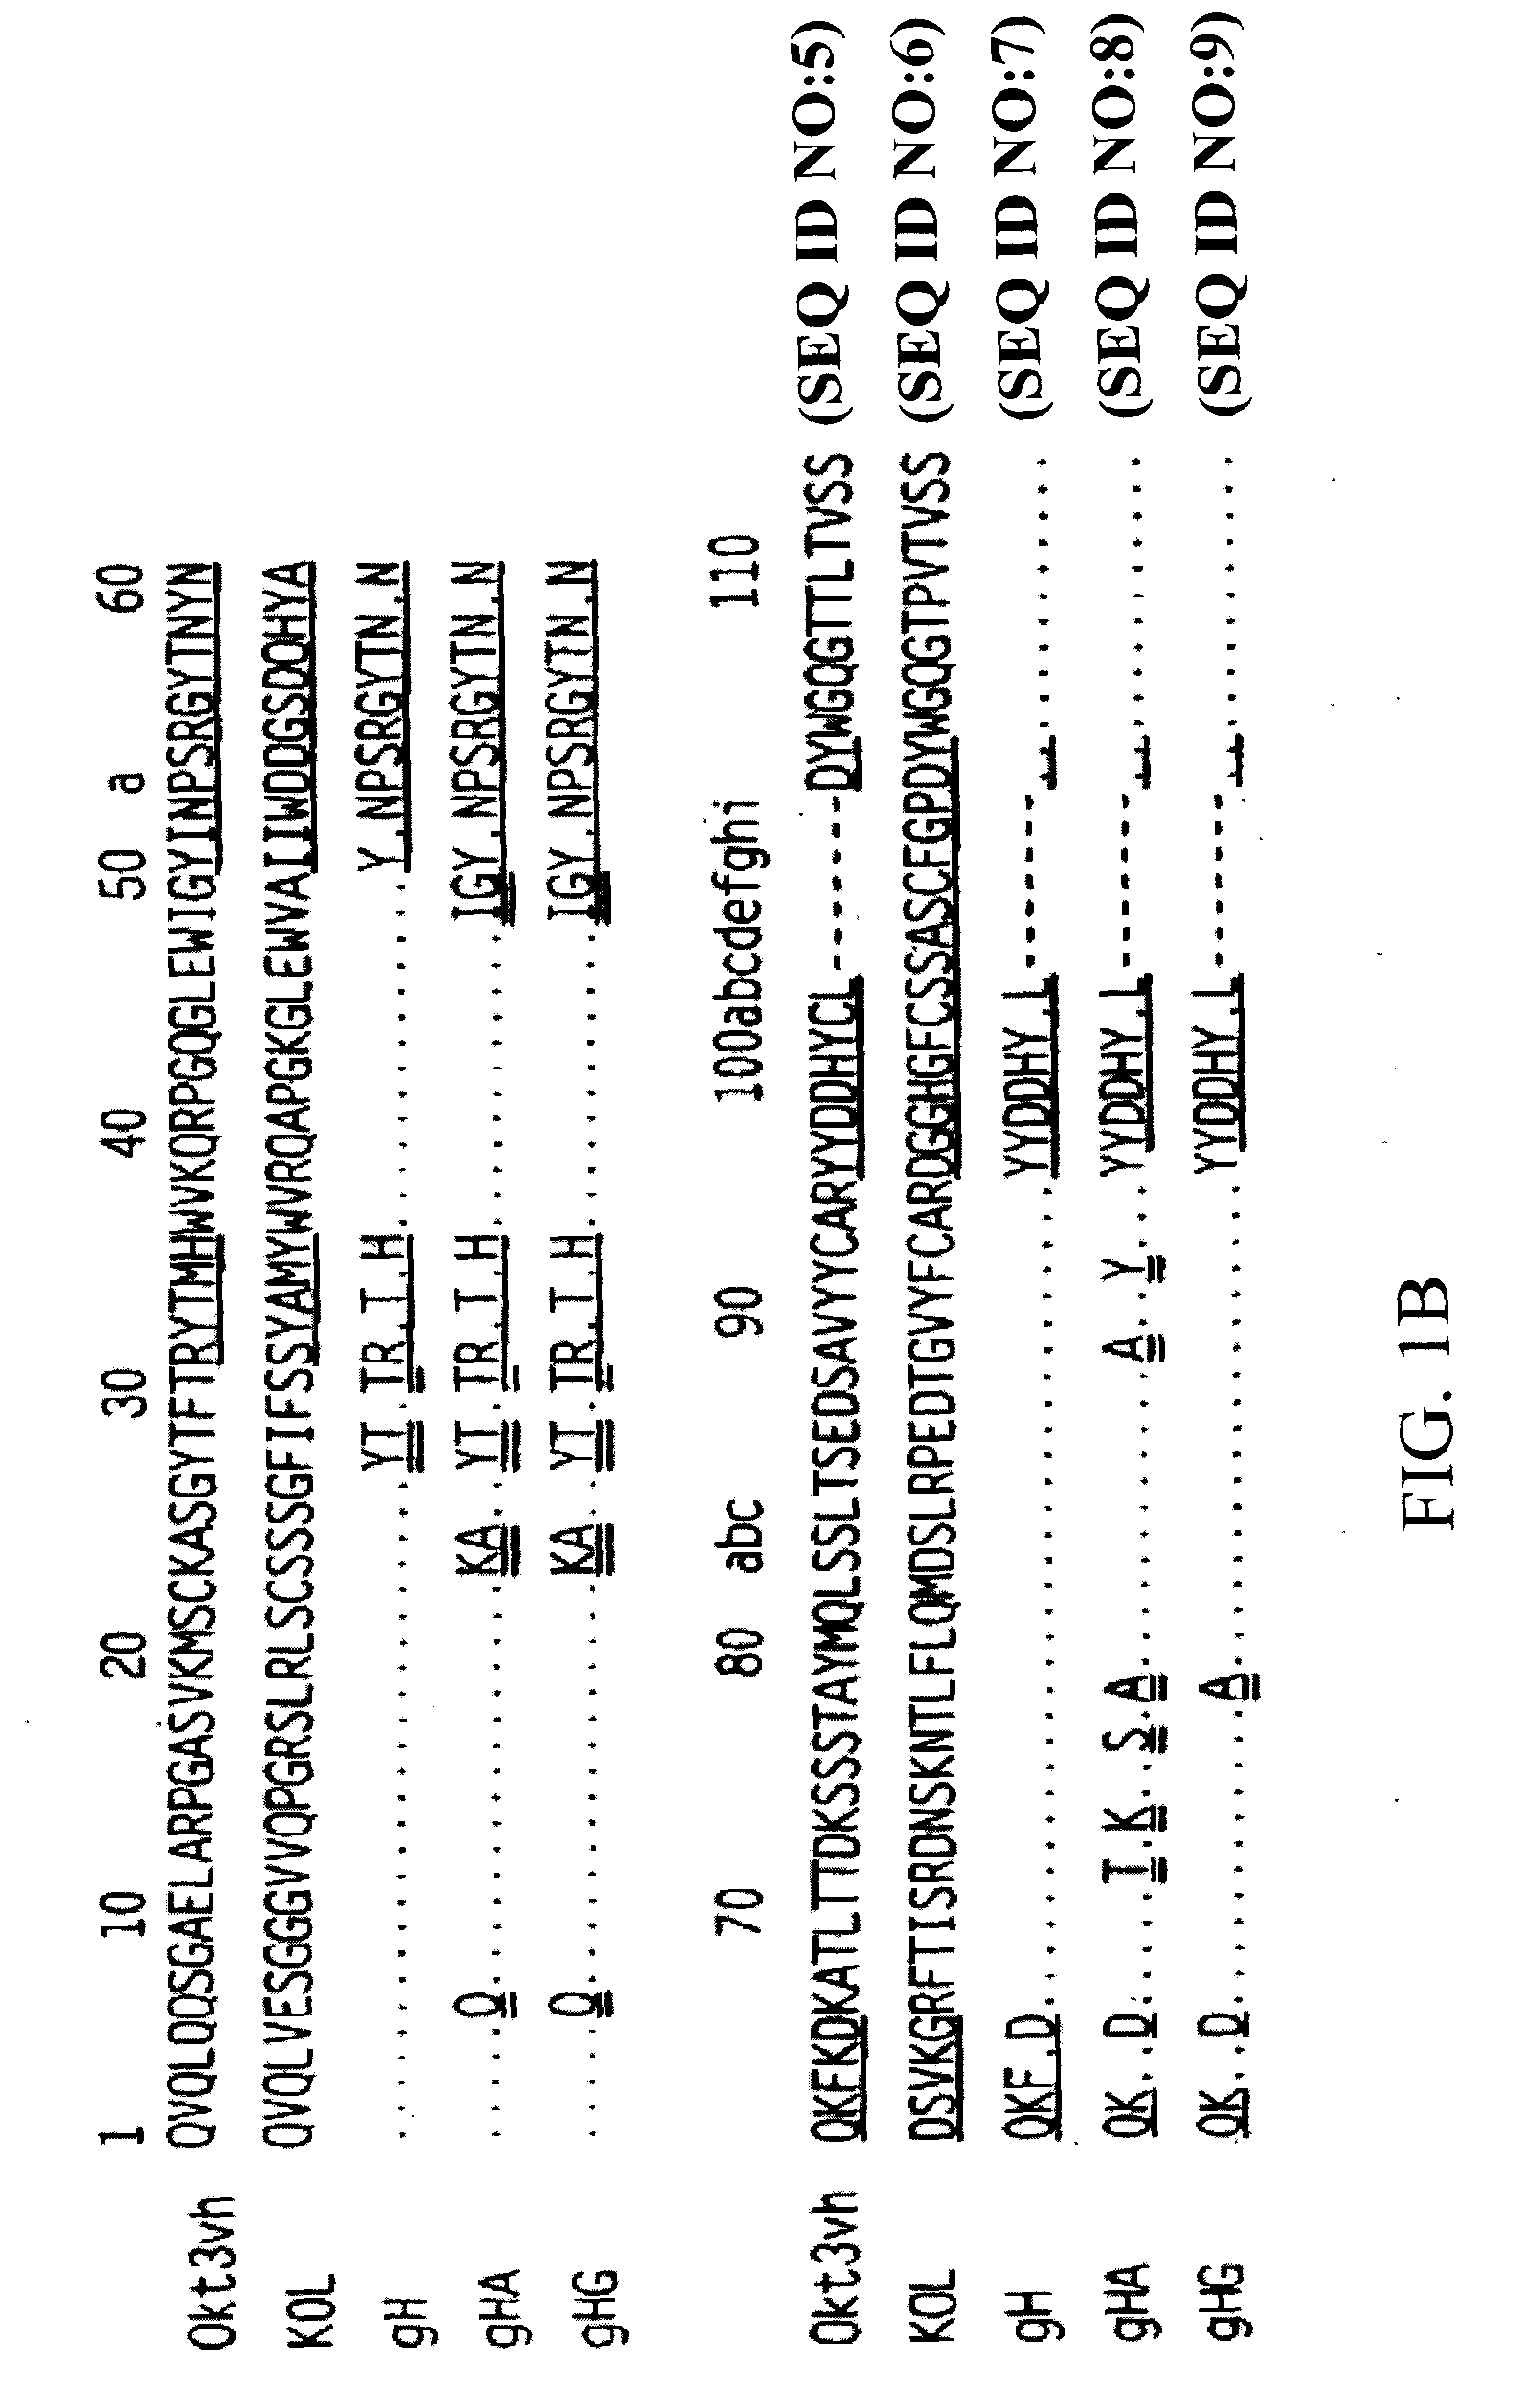 Methods for the treatment of lada and other adult- onset autoimmune using immunosuppressive monoclonal antibodies with reduced toxicity